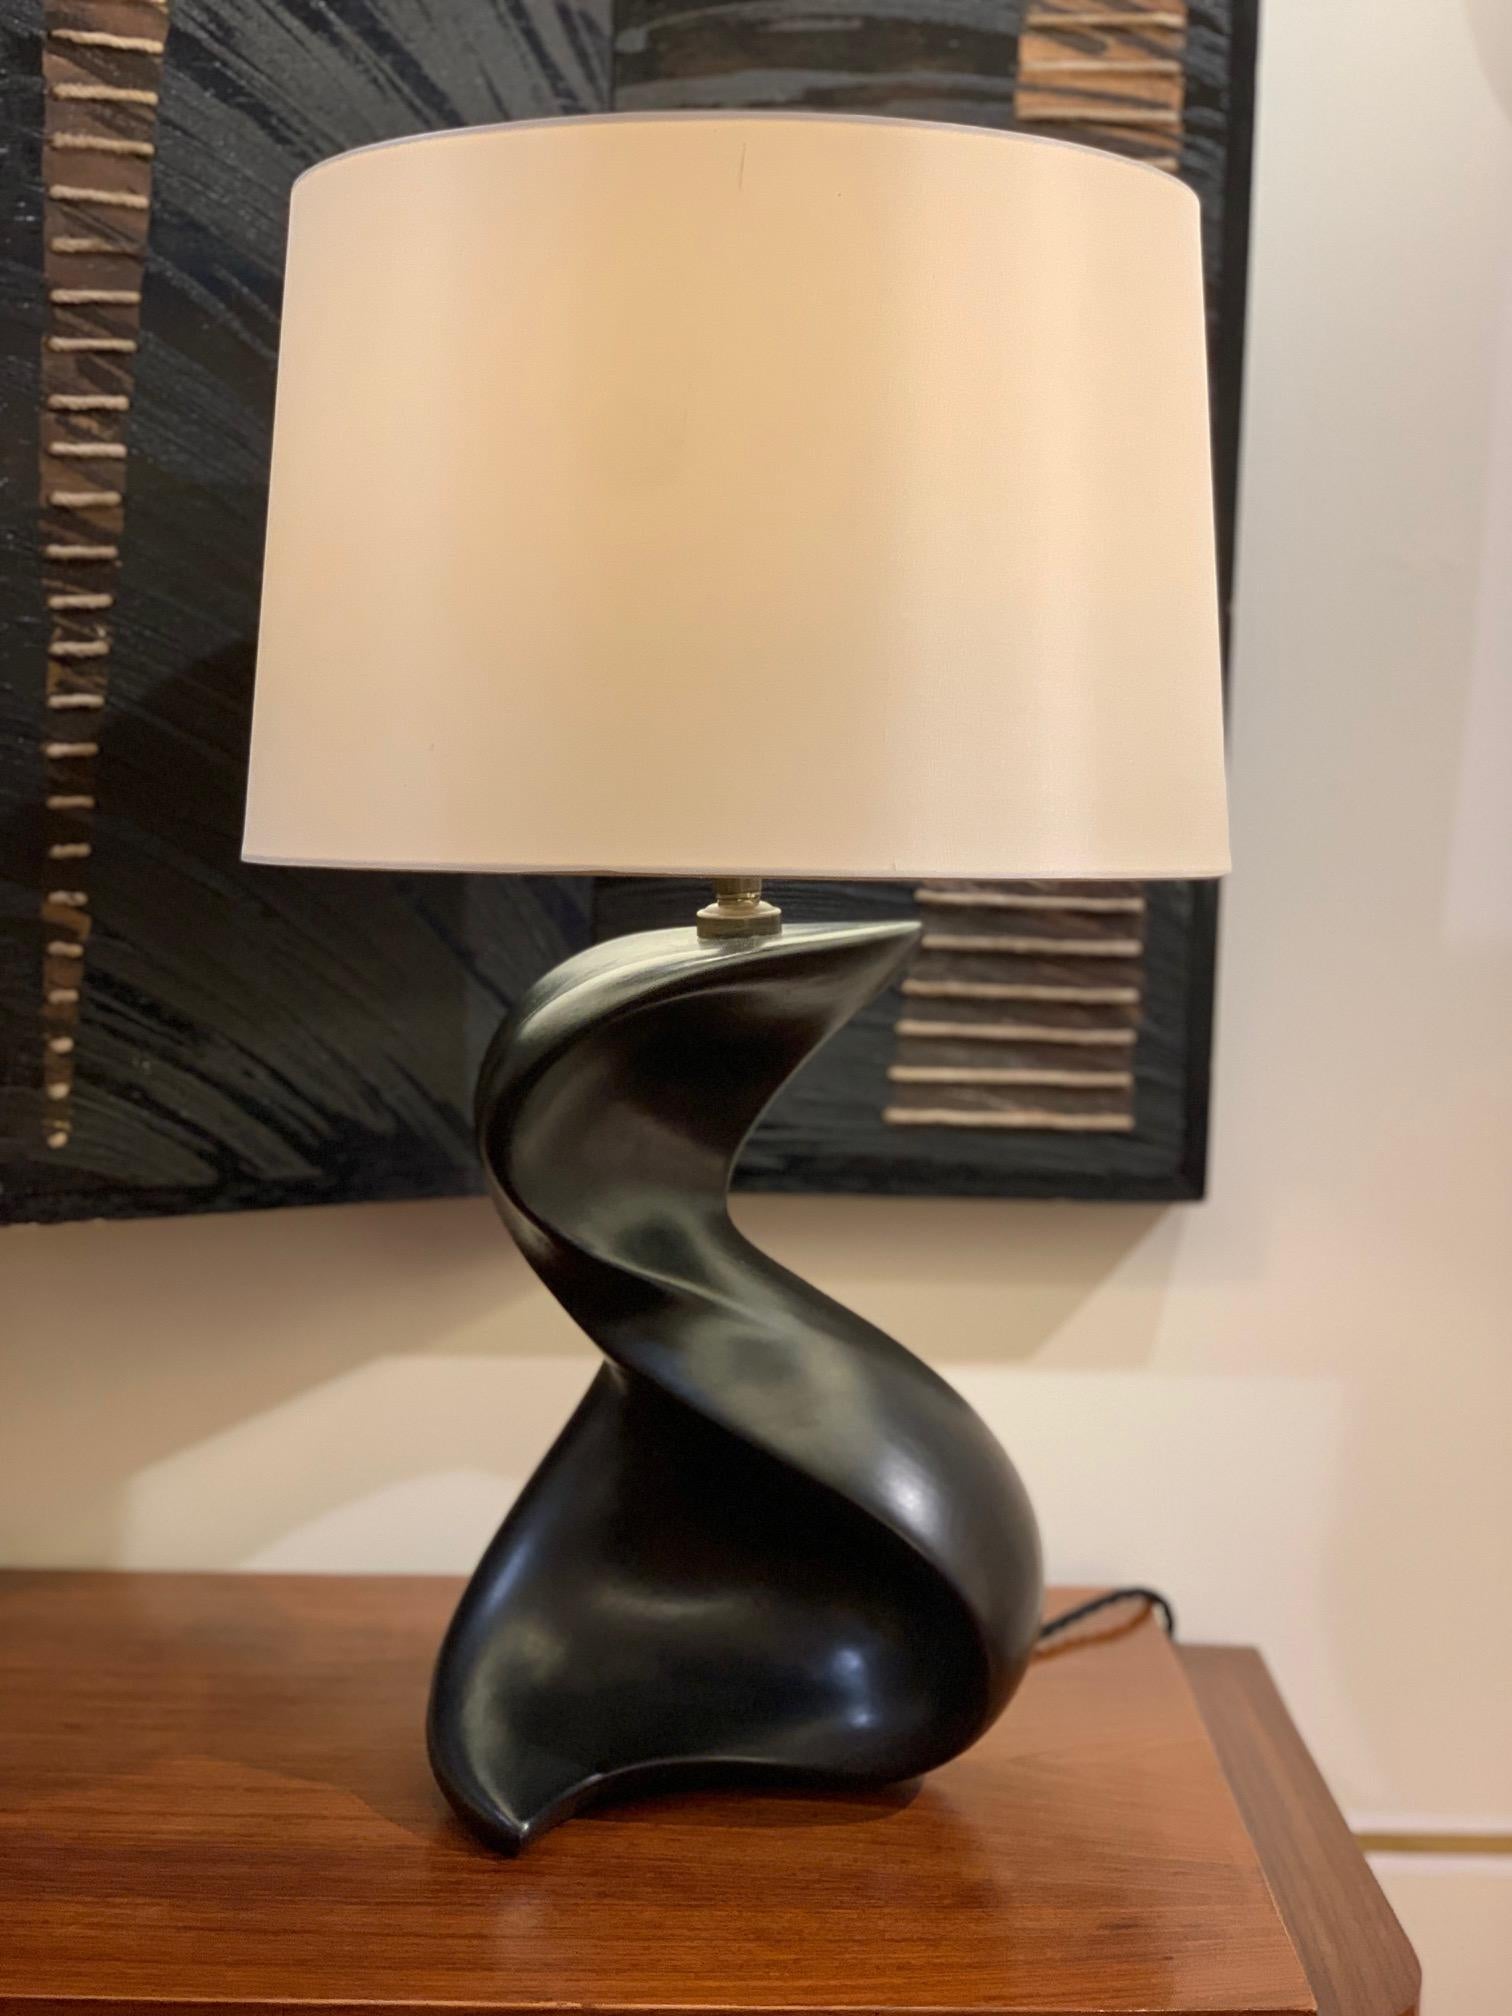 A large freeform black ceramic table lamp, with a distinctive slightly metallic glaze
France, circa 1950
Including the shade: 58 cm high by 35 cm diameter
Base only, ex fitting: 32cm high by 23 cm wide.